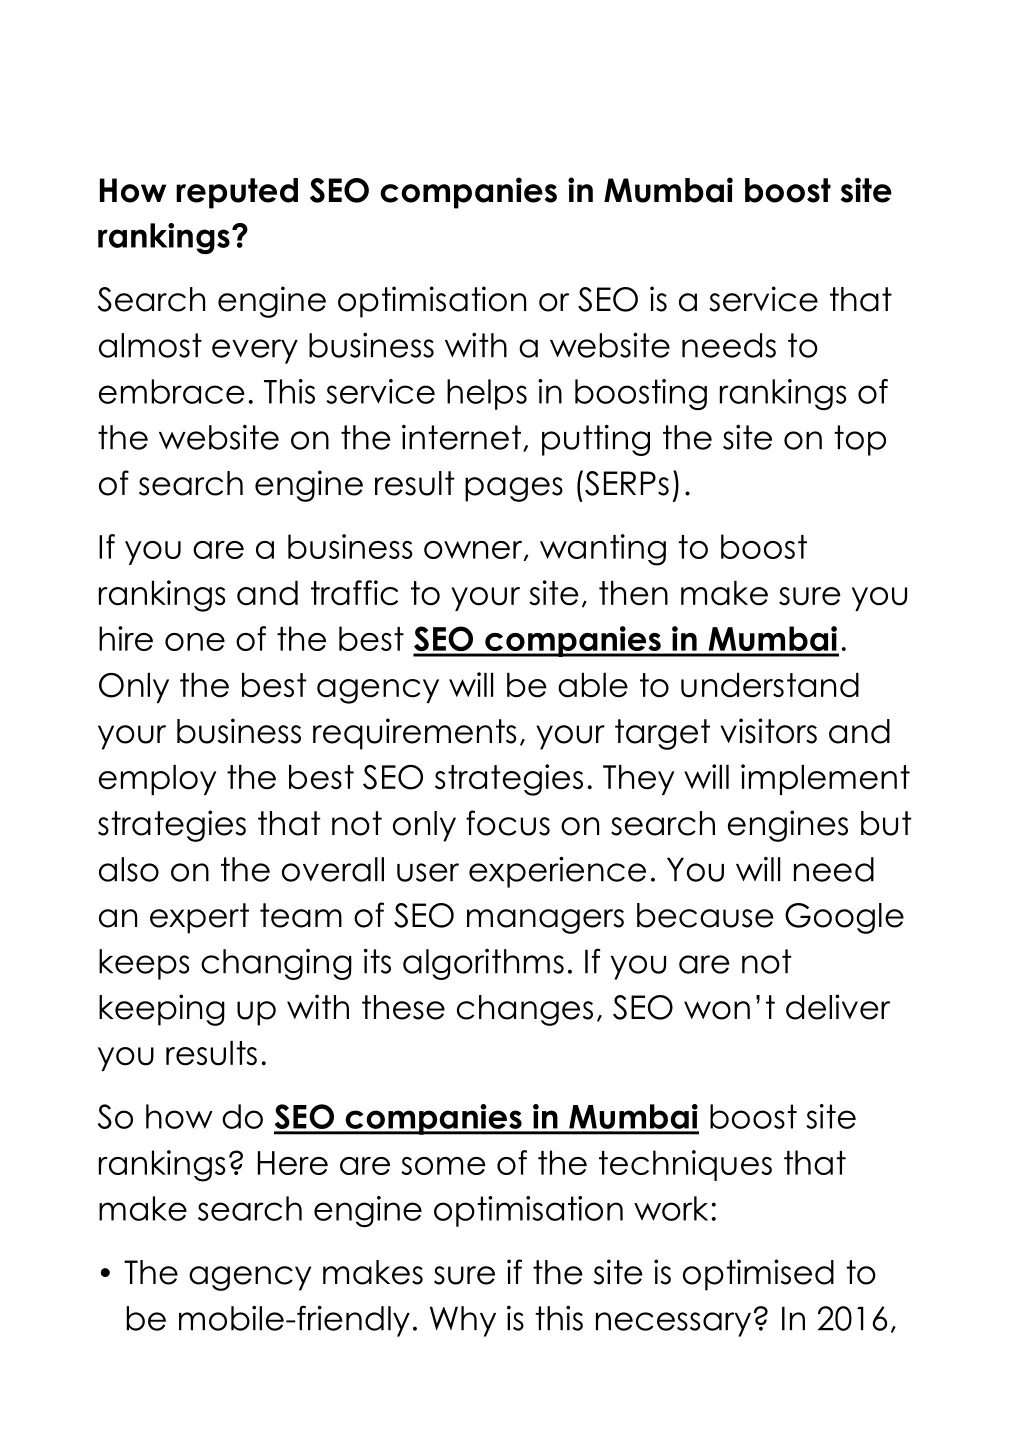 how reputed seo companies in mumbai boost site